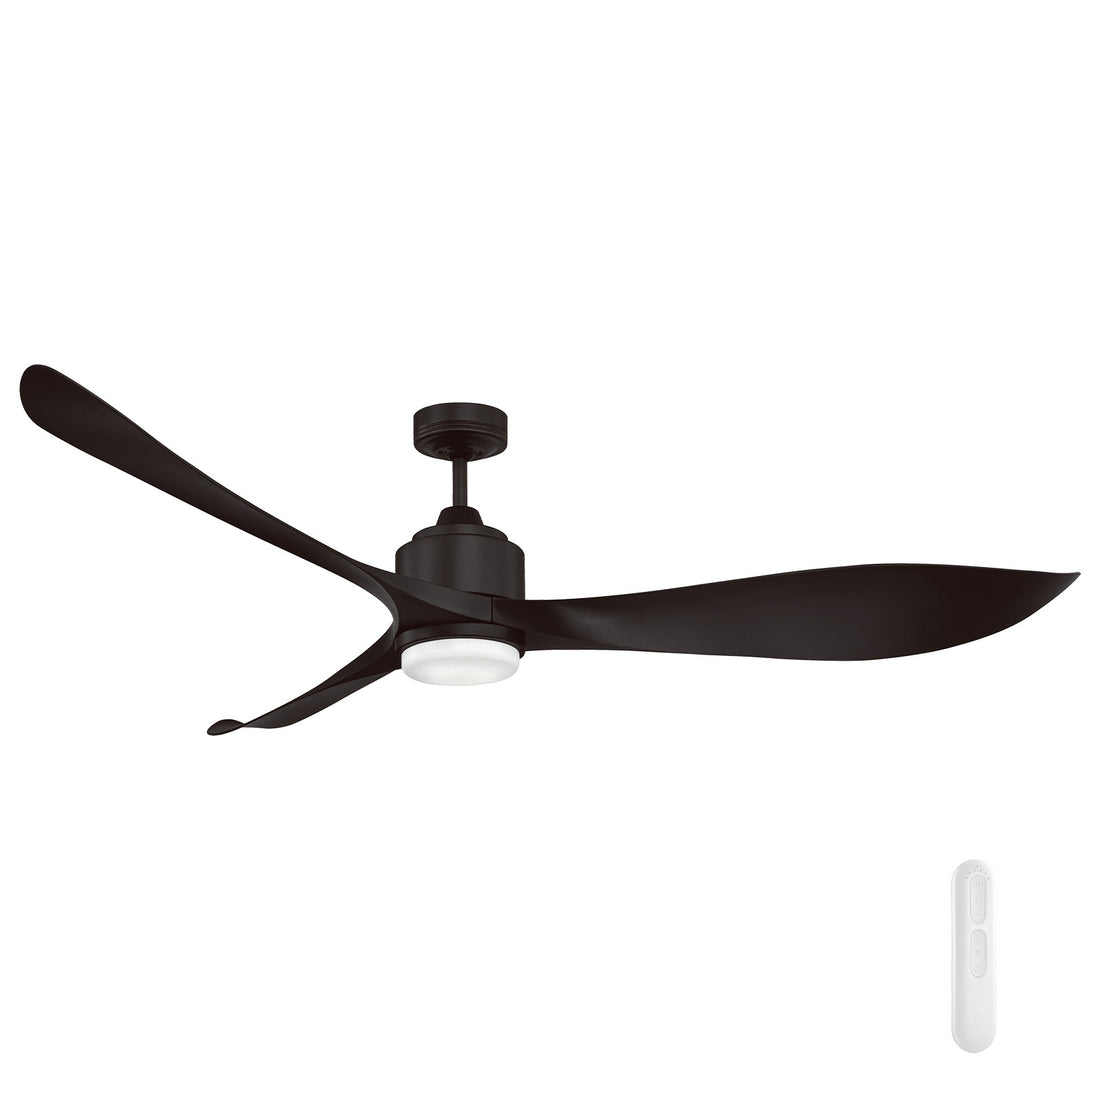 Eagle XL 168cm DC Ceiling Fan with LED Light and Remote